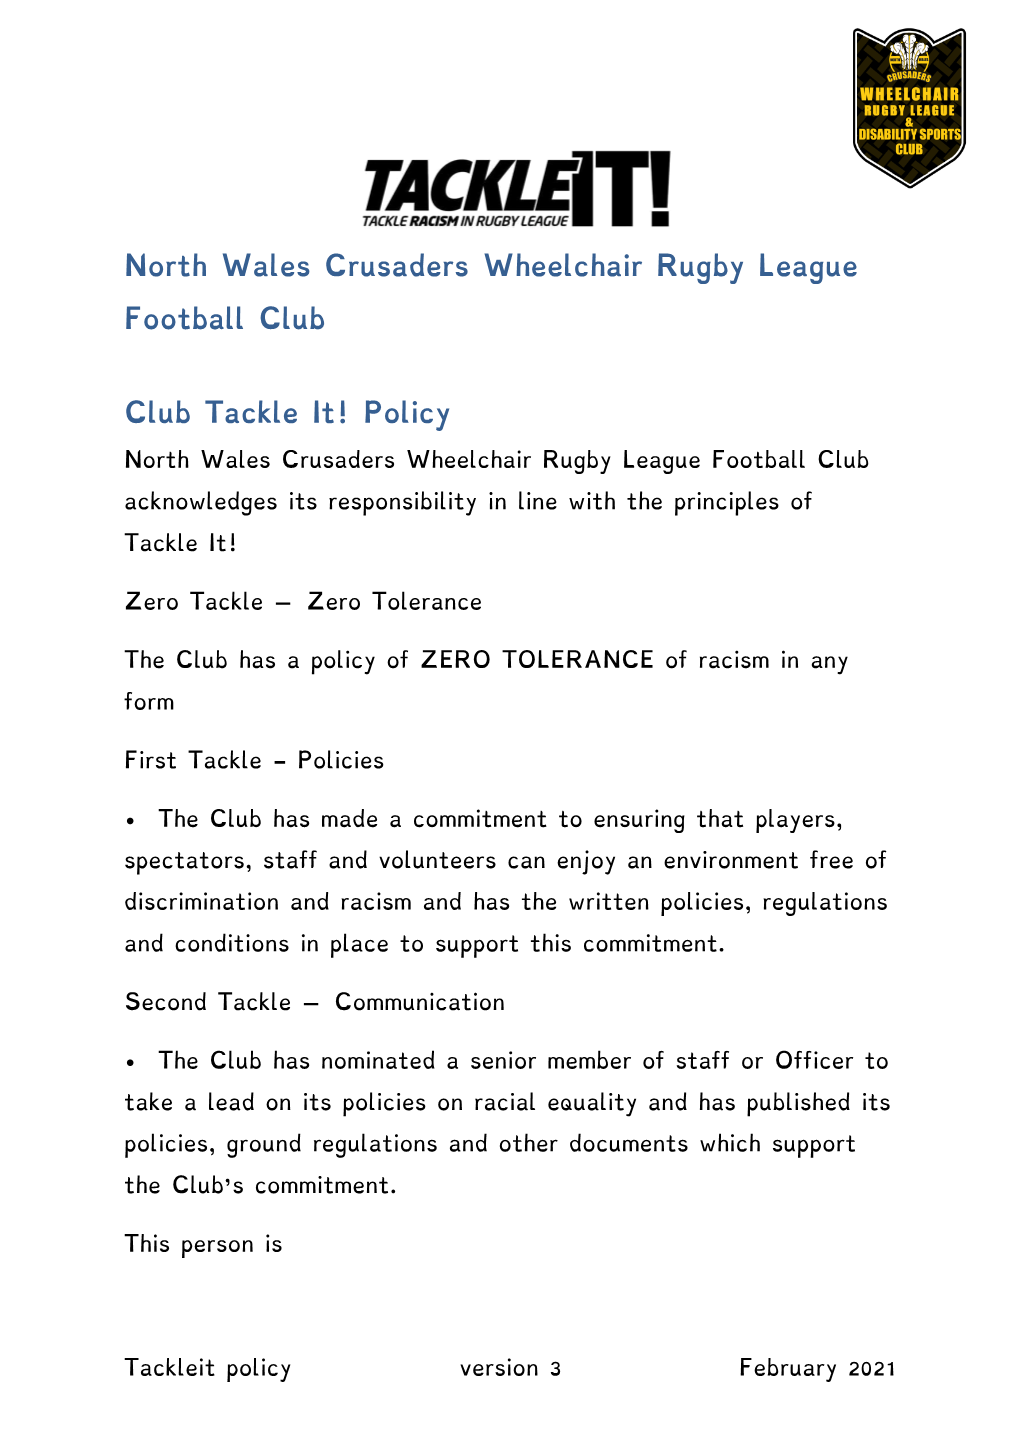 North Wales Crusaders Wheelchair Rugby League Football Club Acknowledges Its Responsibility in Line with the Principles Of